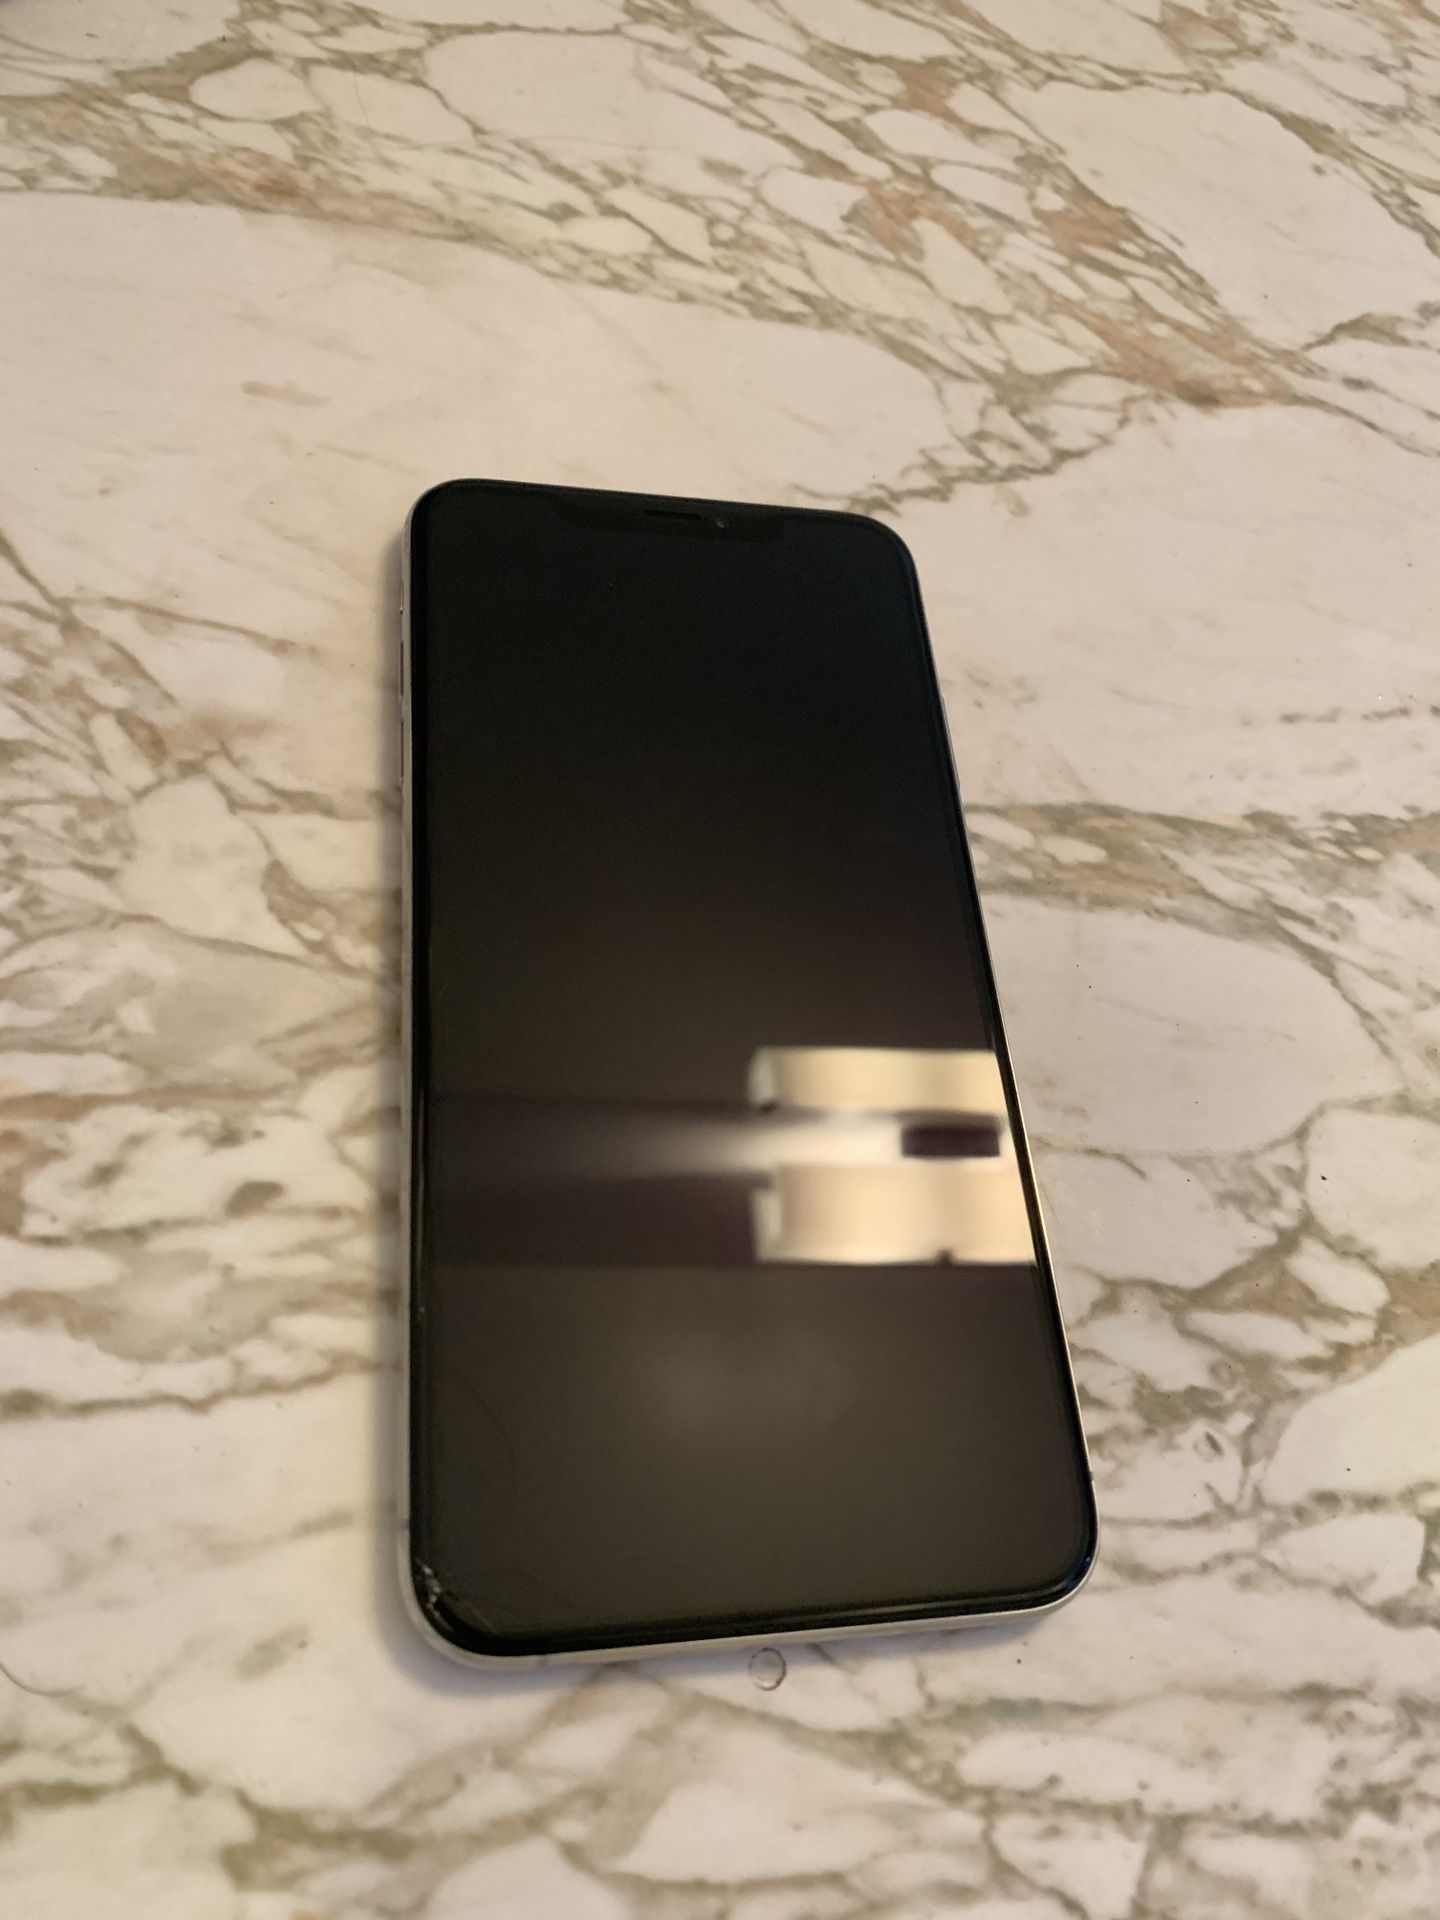 iPhone XS Max 64gb with box